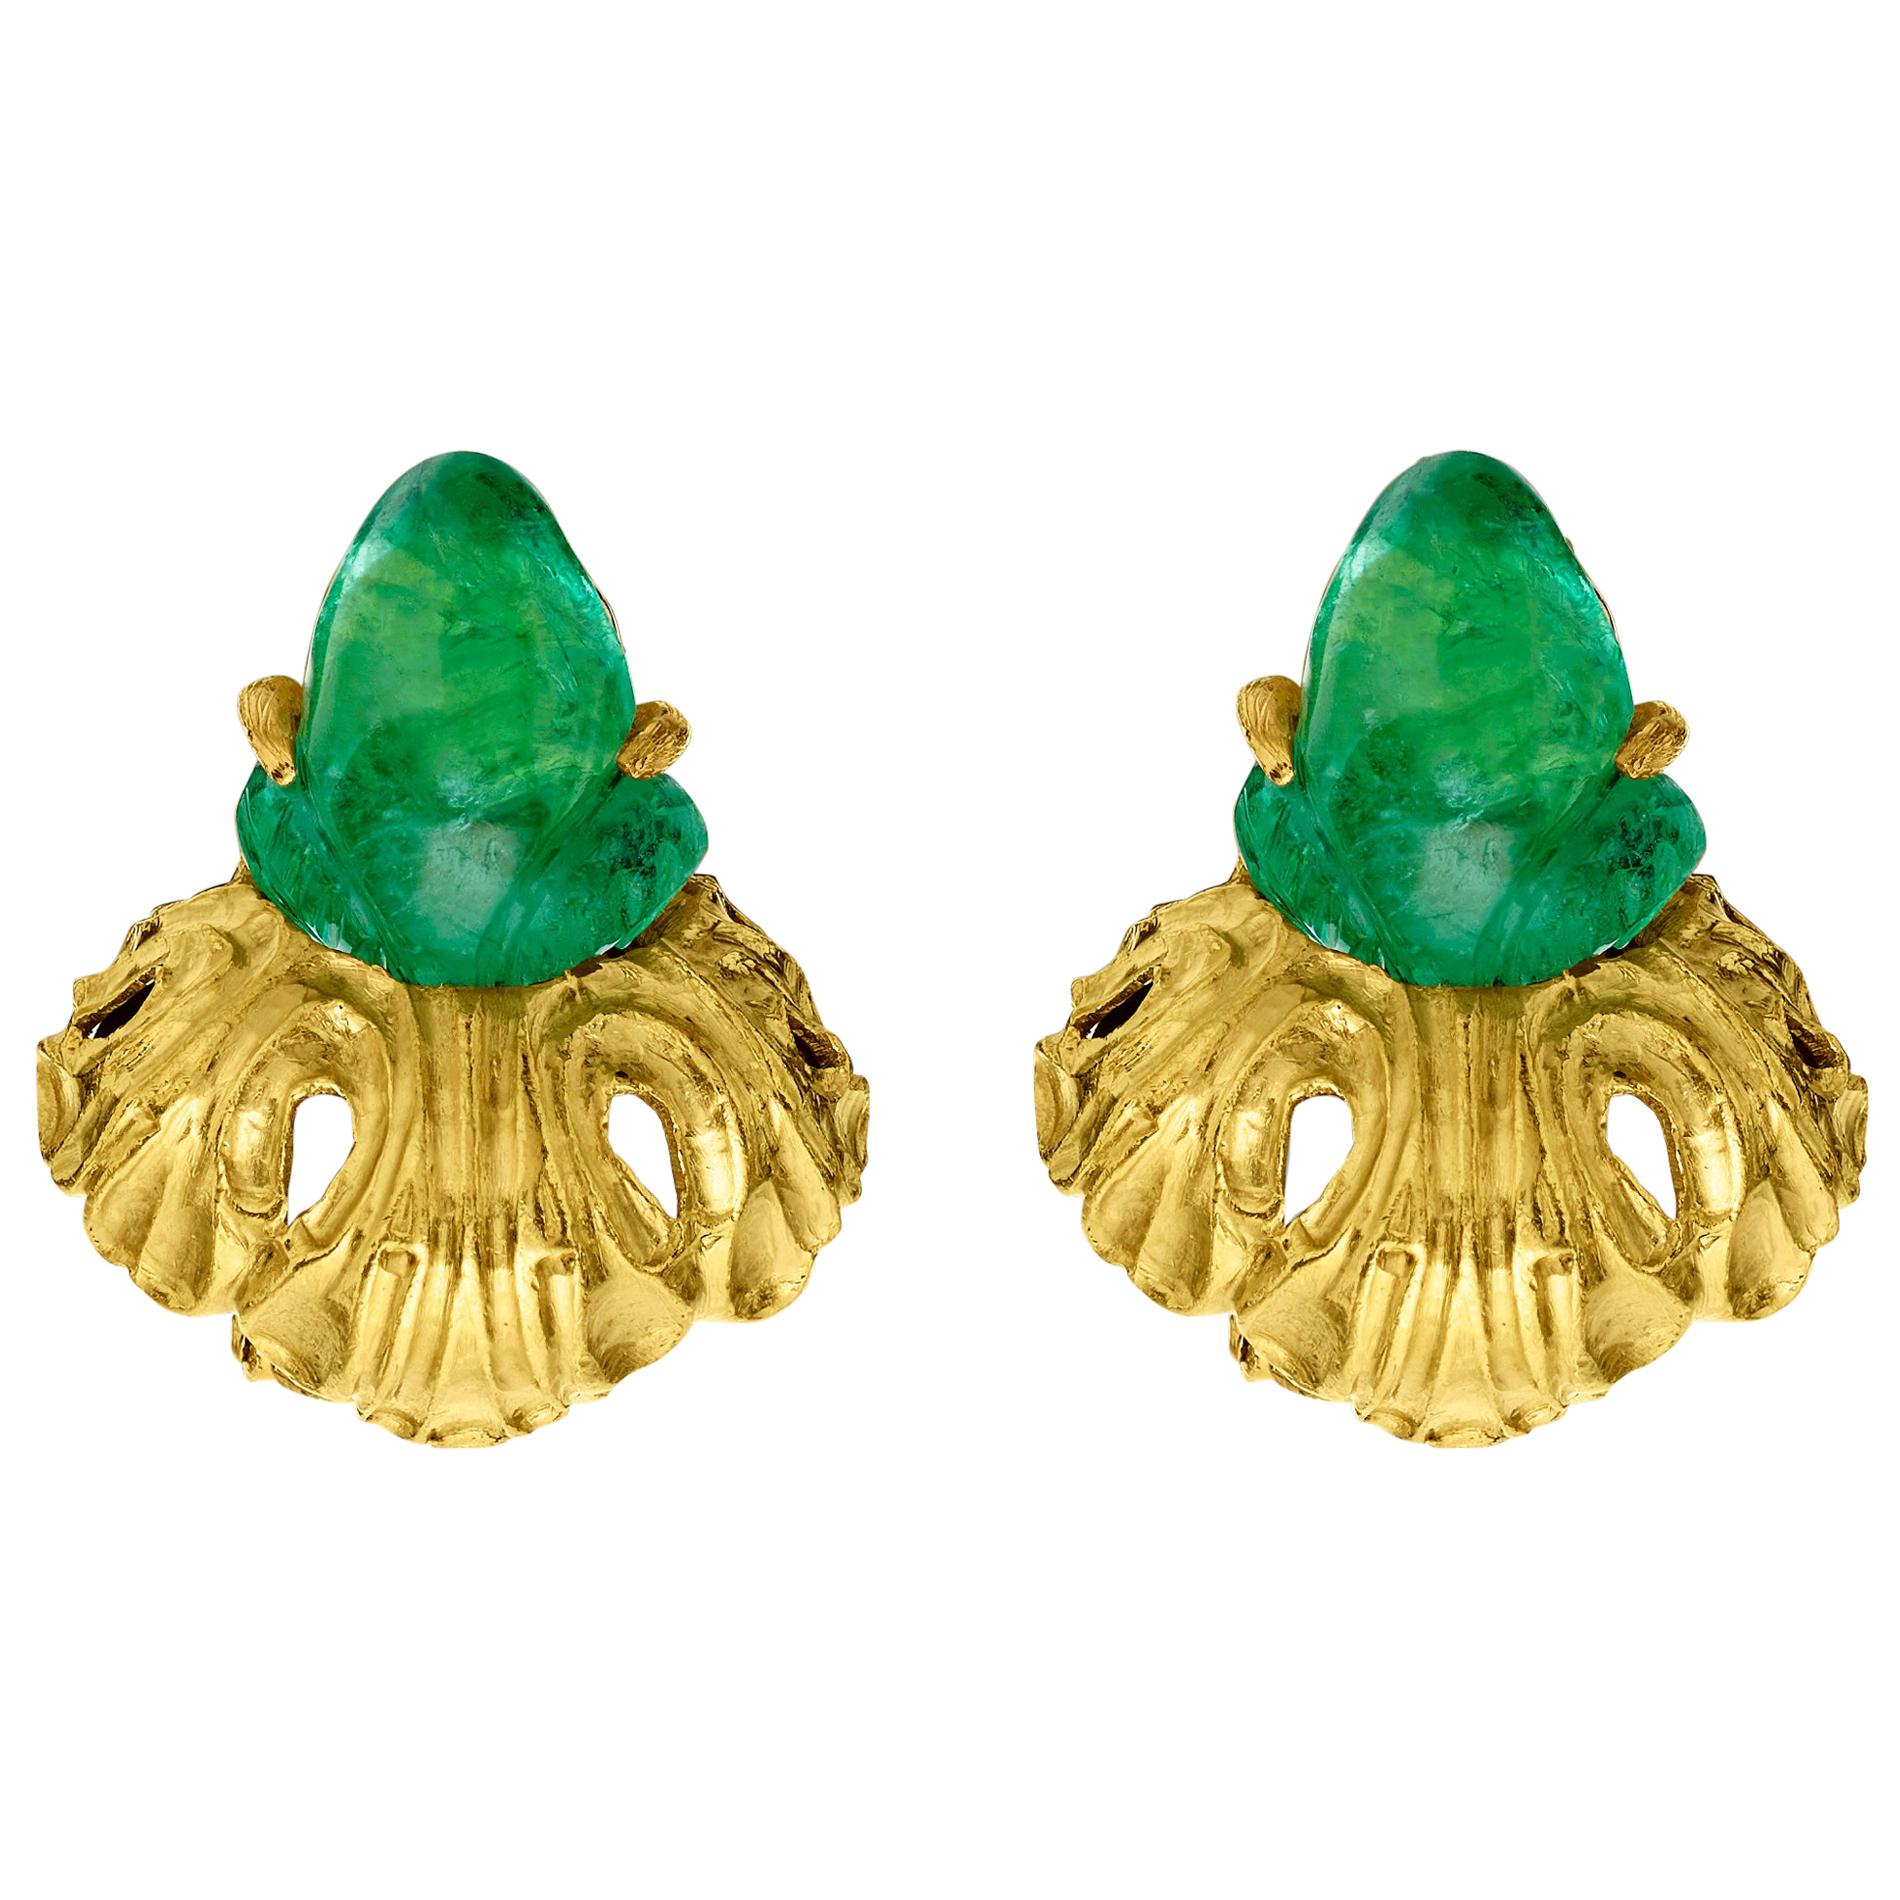 Vintage 1950s Yellow Gold and Carved Emerald Buccellati Clip-On Earrings